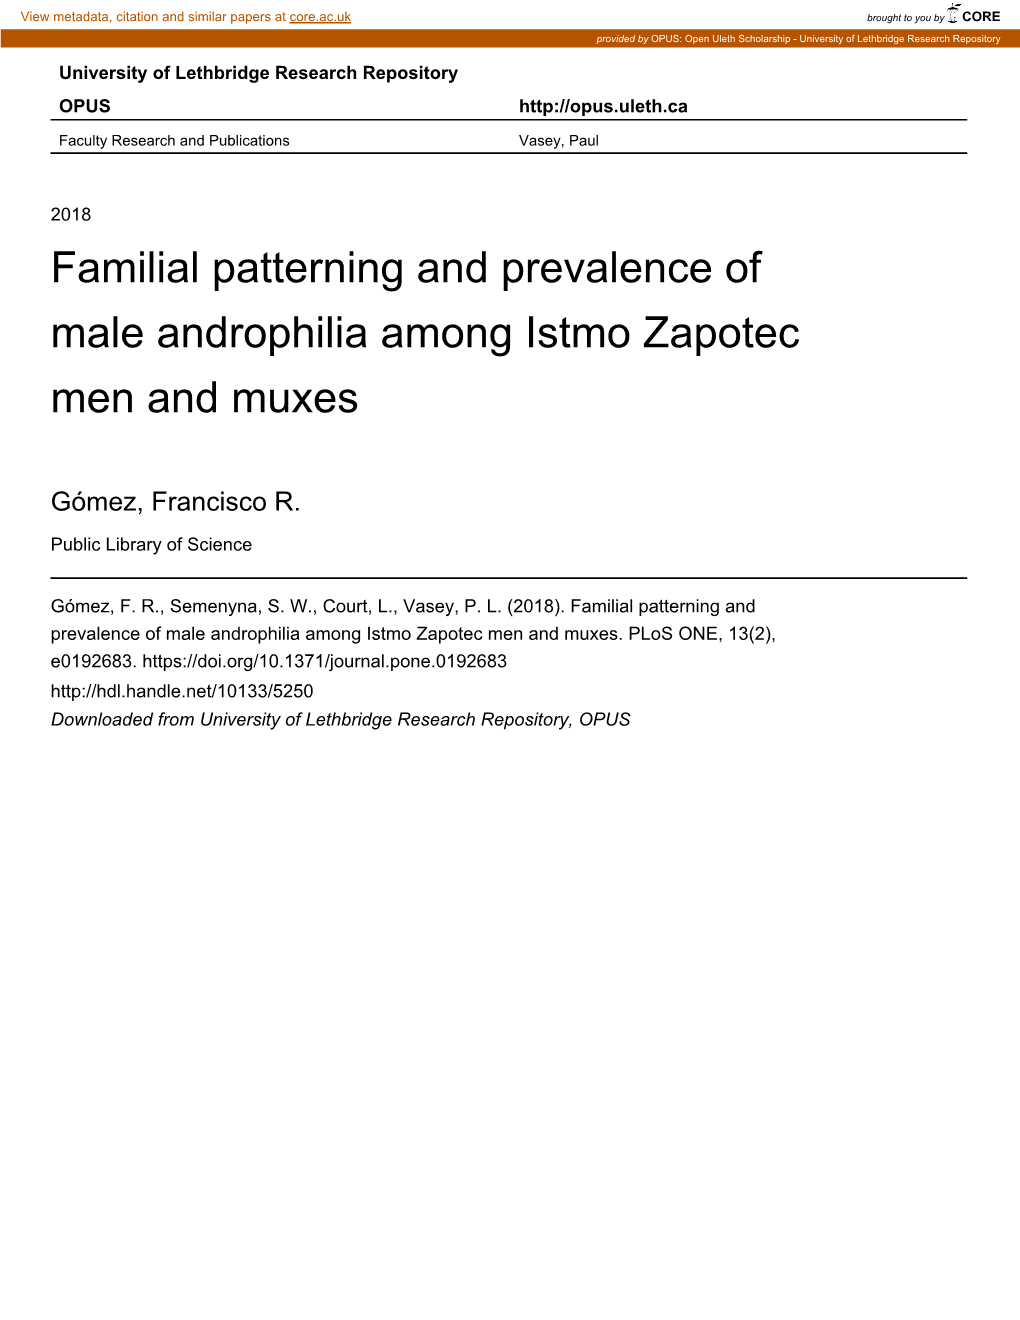 Familial Patterning and Prevalence of Male Androphilia Among Istmo Zapotec Men and Muxes